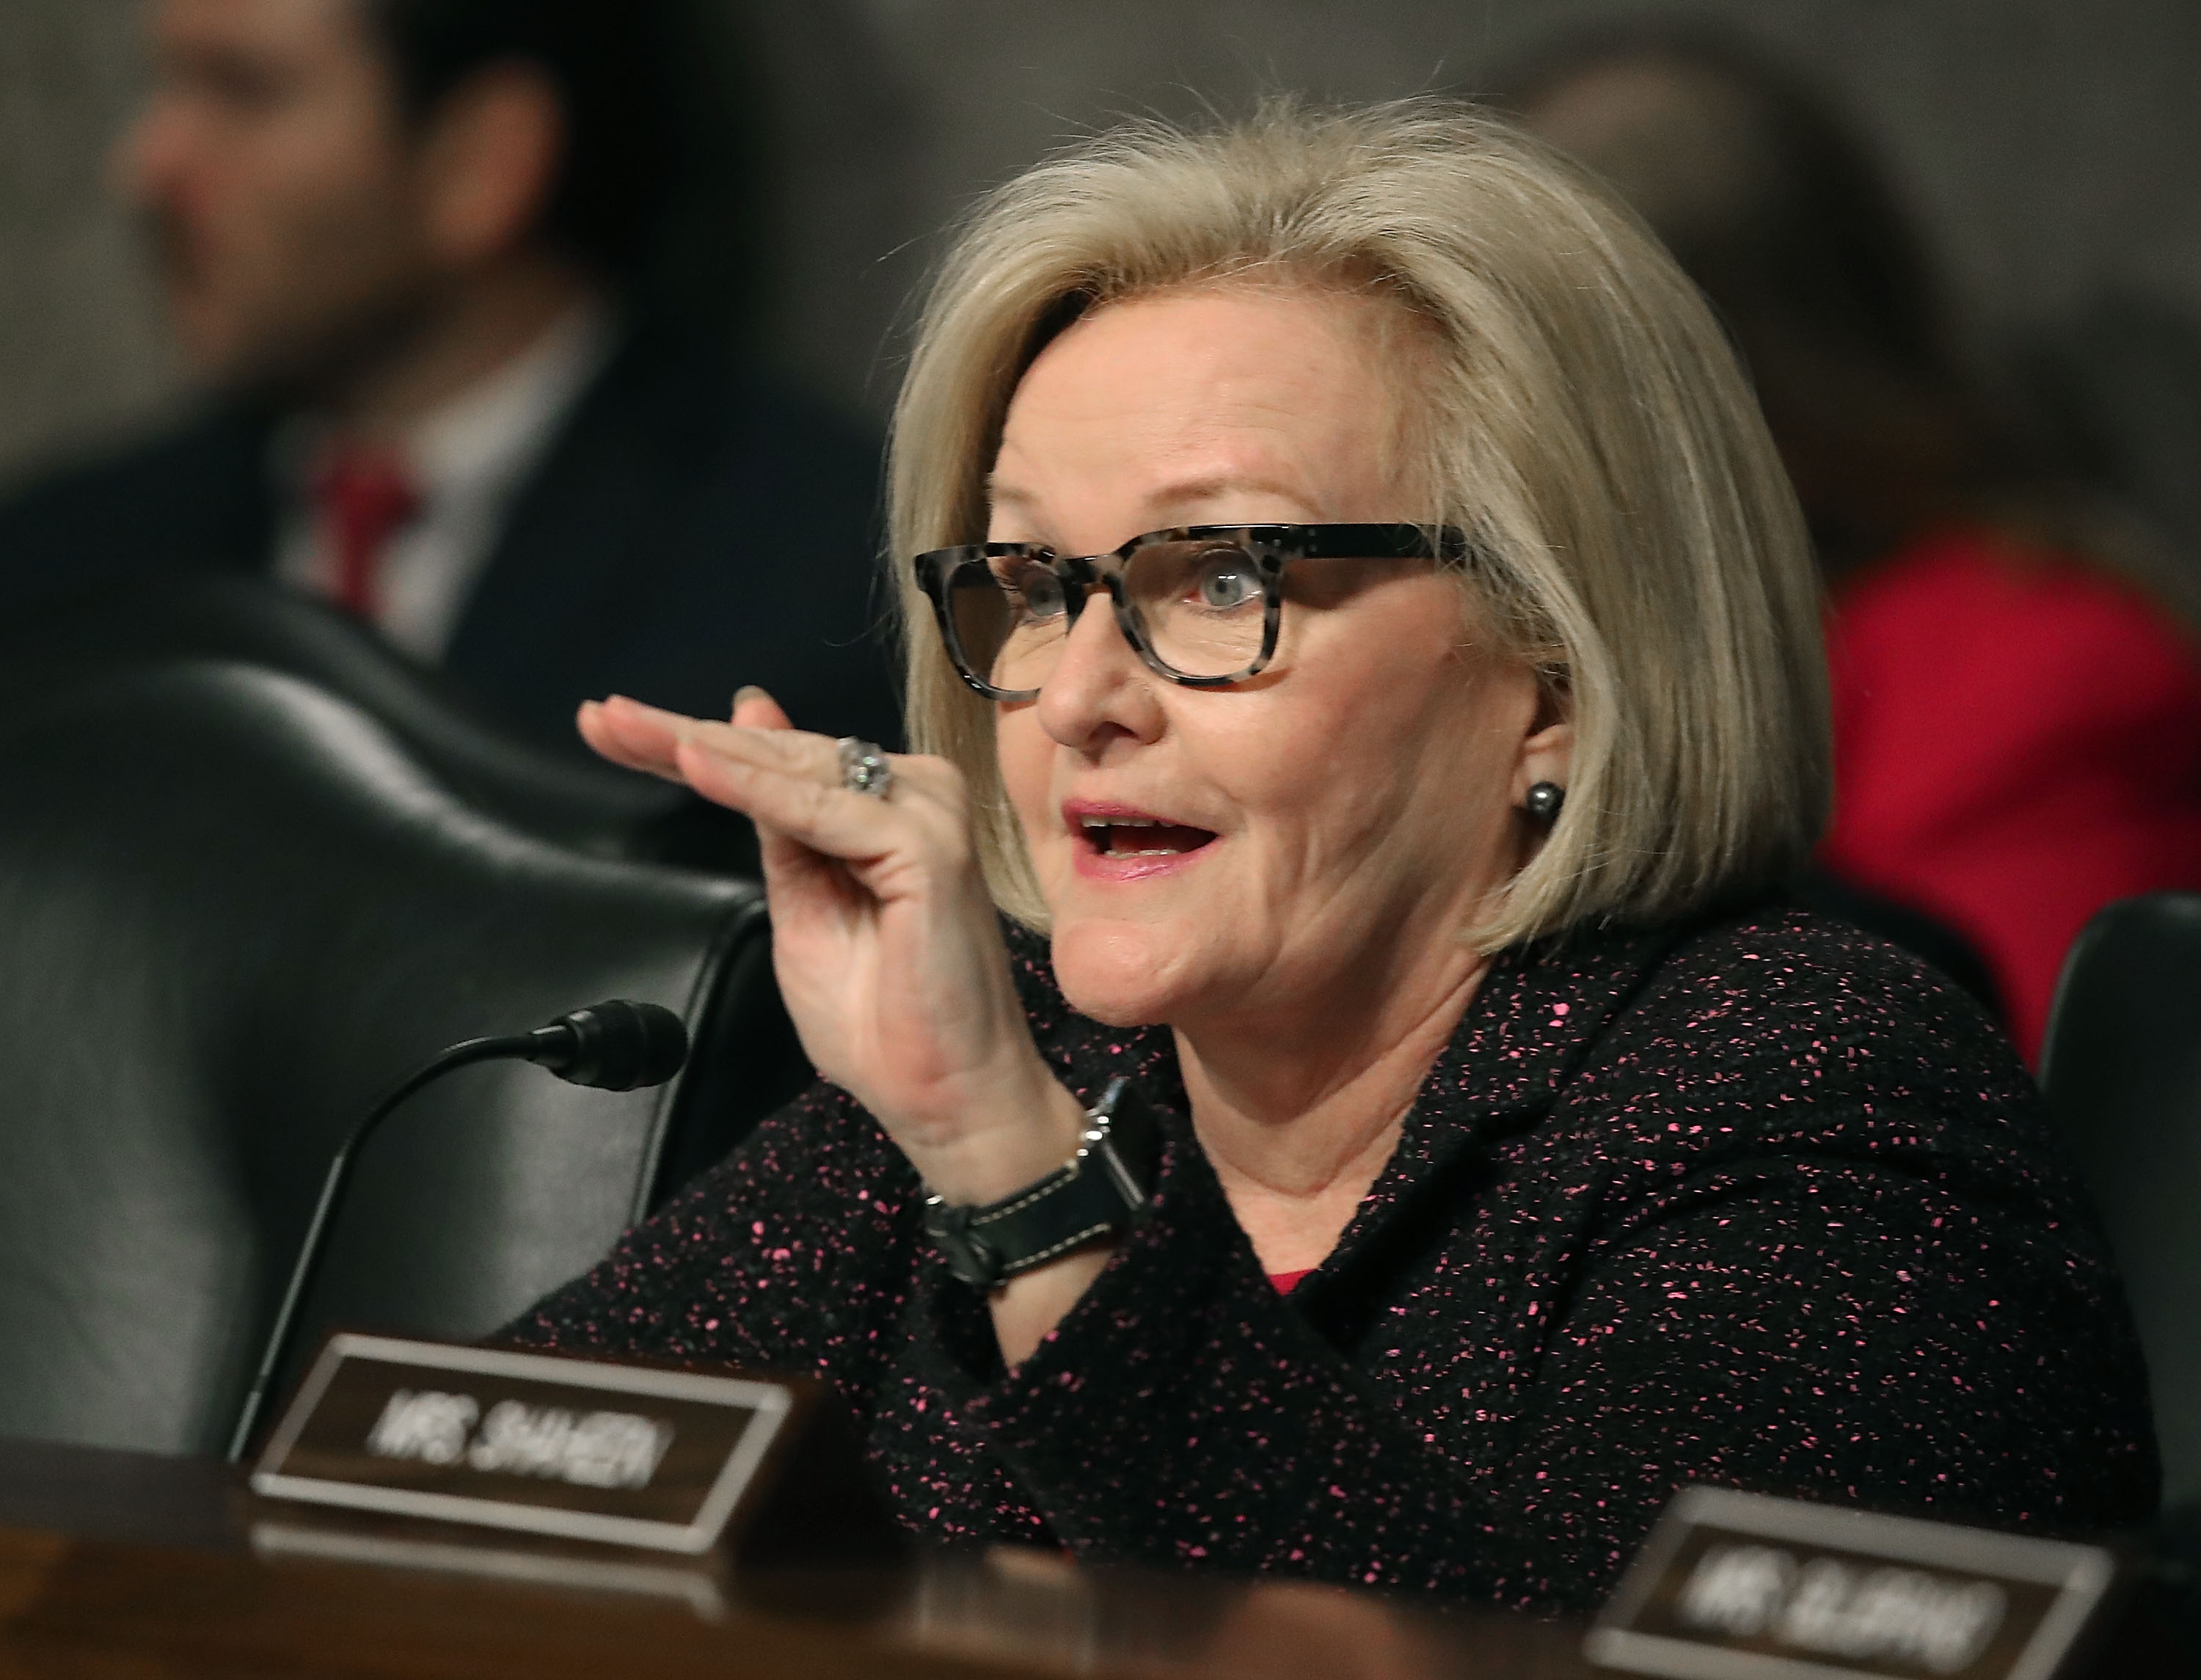 Sen. Claire McCaskill (D-MO), questions Defense Secretary nominee, retired Marine Corps Gen. James Mattis during his Senate Armed Services Committee confirmation hearing on Capitol Hill, on Jan. 12, 2017 in Washington, D.C. (Mark Wilson—Getty Images)